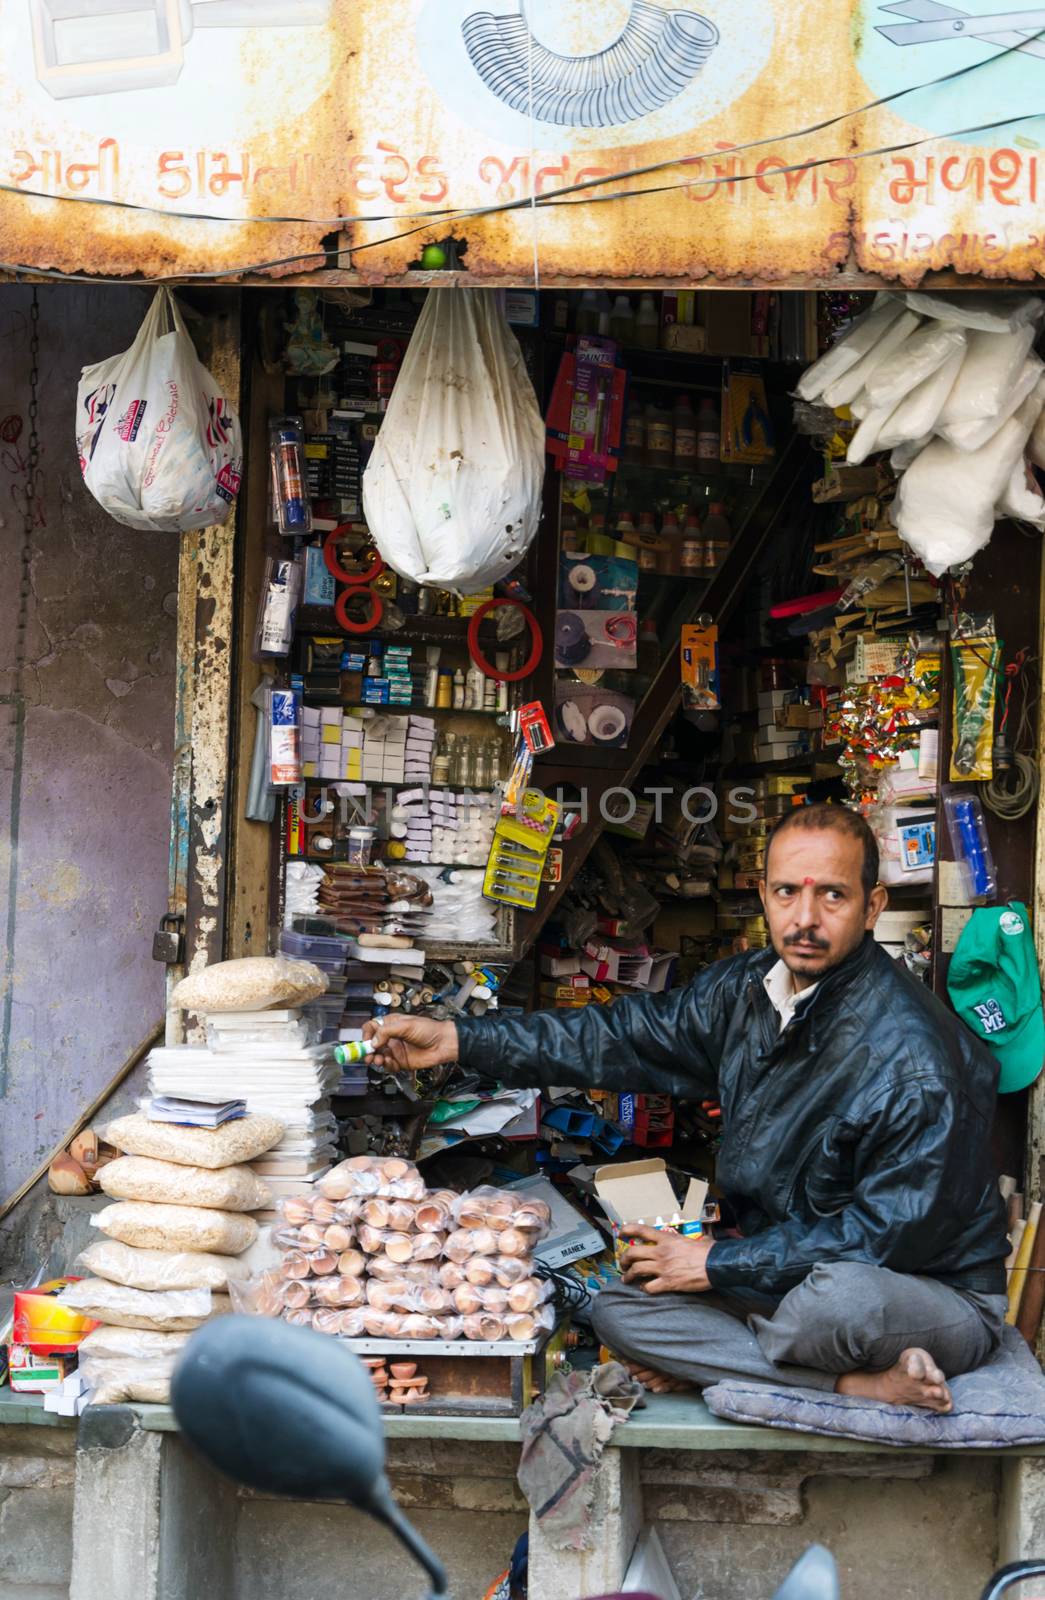 Ahmedabad, India - December 28, 2014: Unidentified Indian man selling variety product at market in Ahmedabad, India. Ahmedabad is the largest city and former capital of the western Indian state of Gujarat.